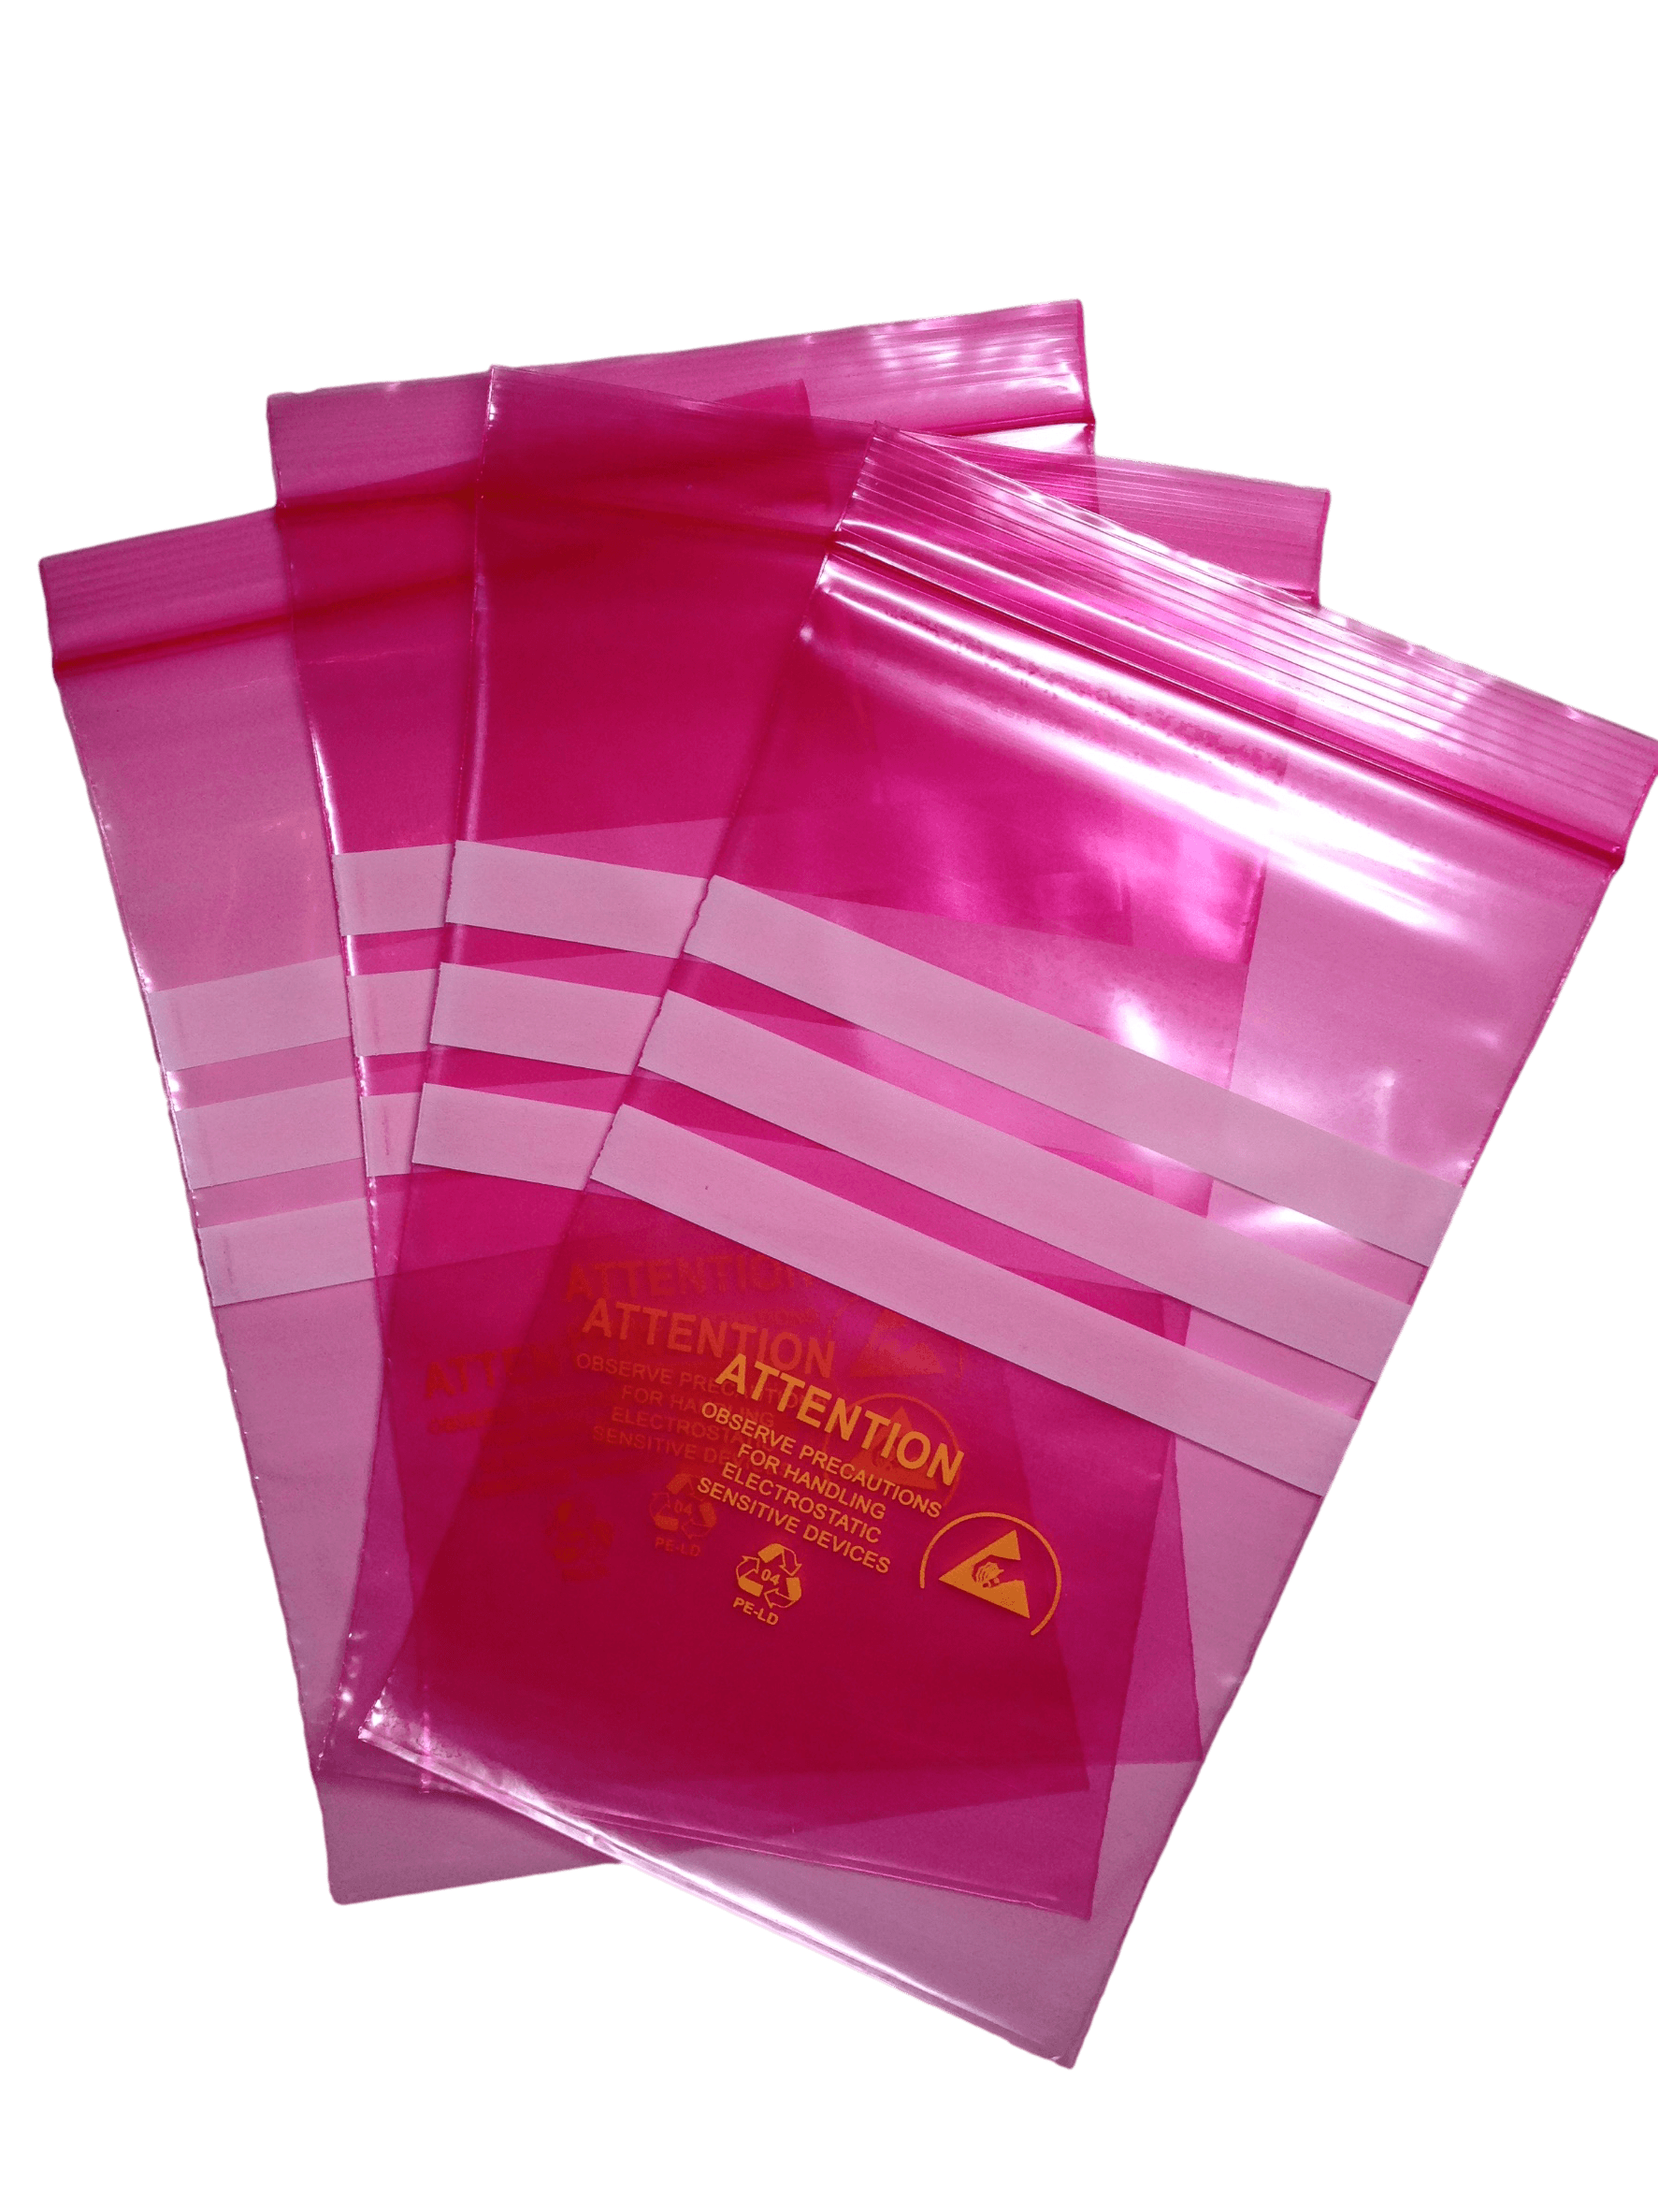 Store and Deliver Electronic Devices Using Our Clear Anti Static Ziplock  Bags